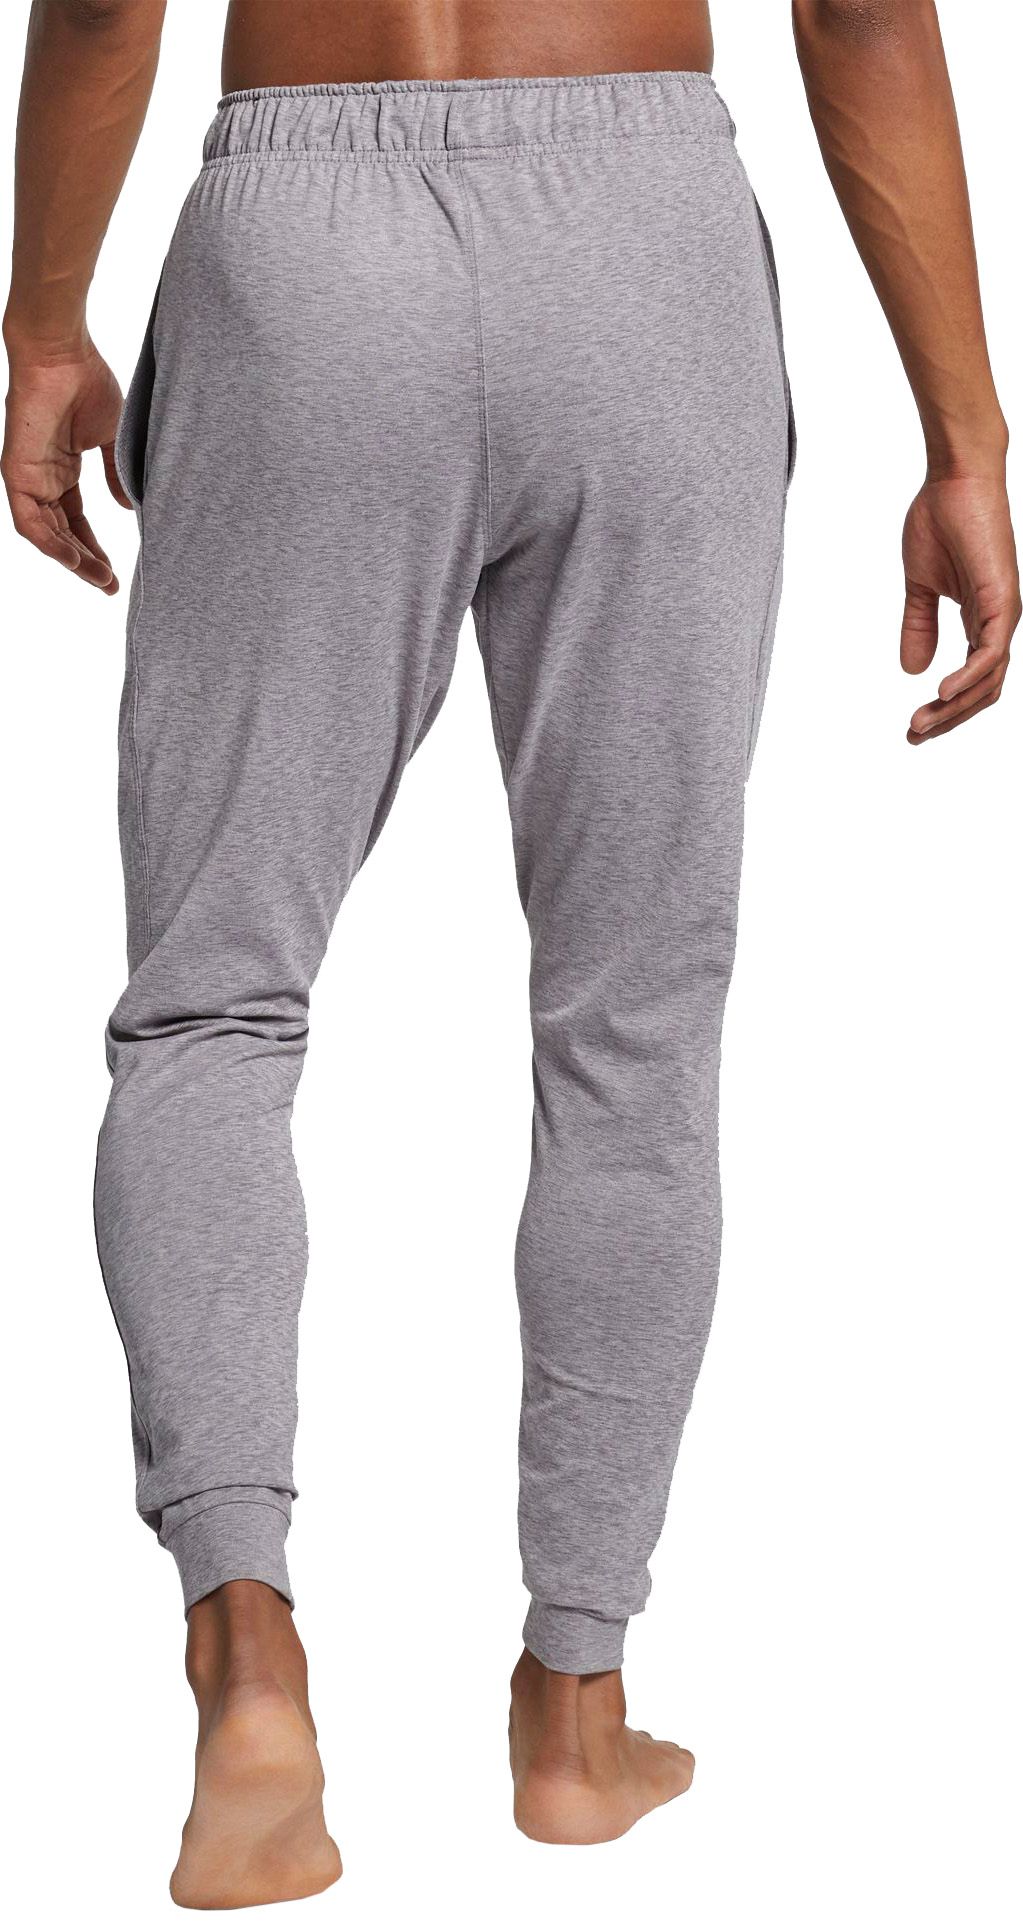 nike performance dry tapered pant